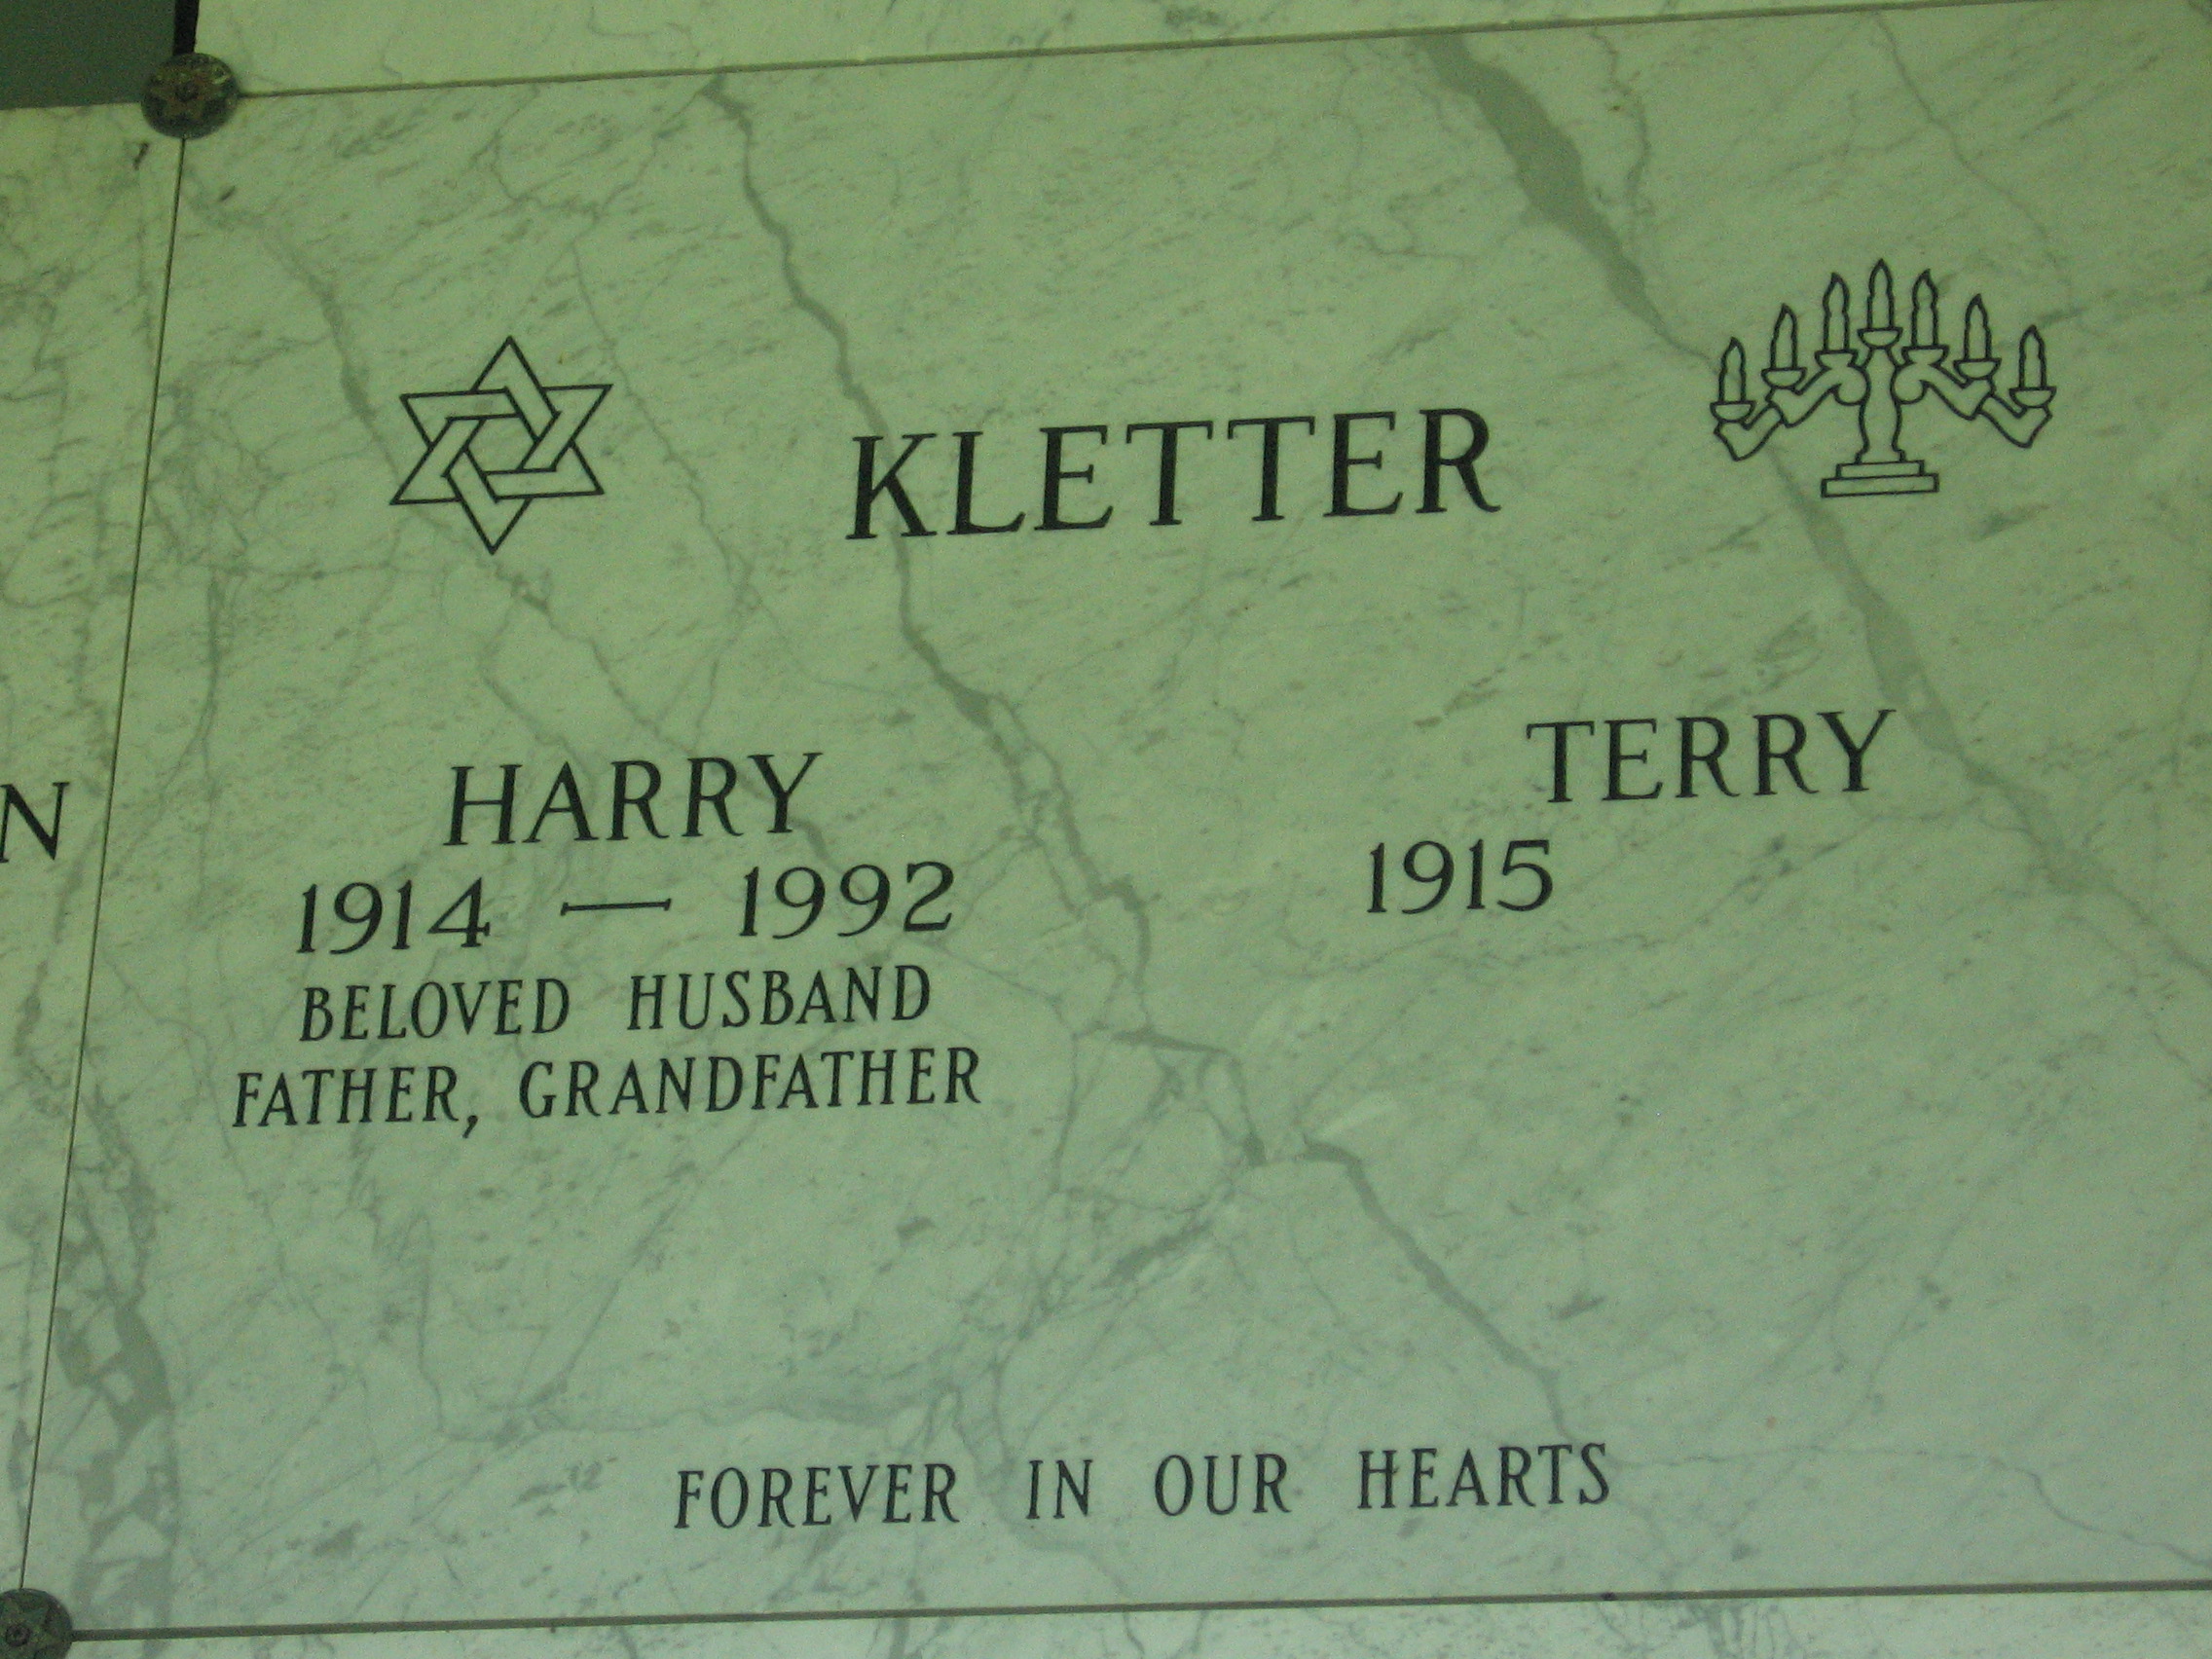 Terry Kletter